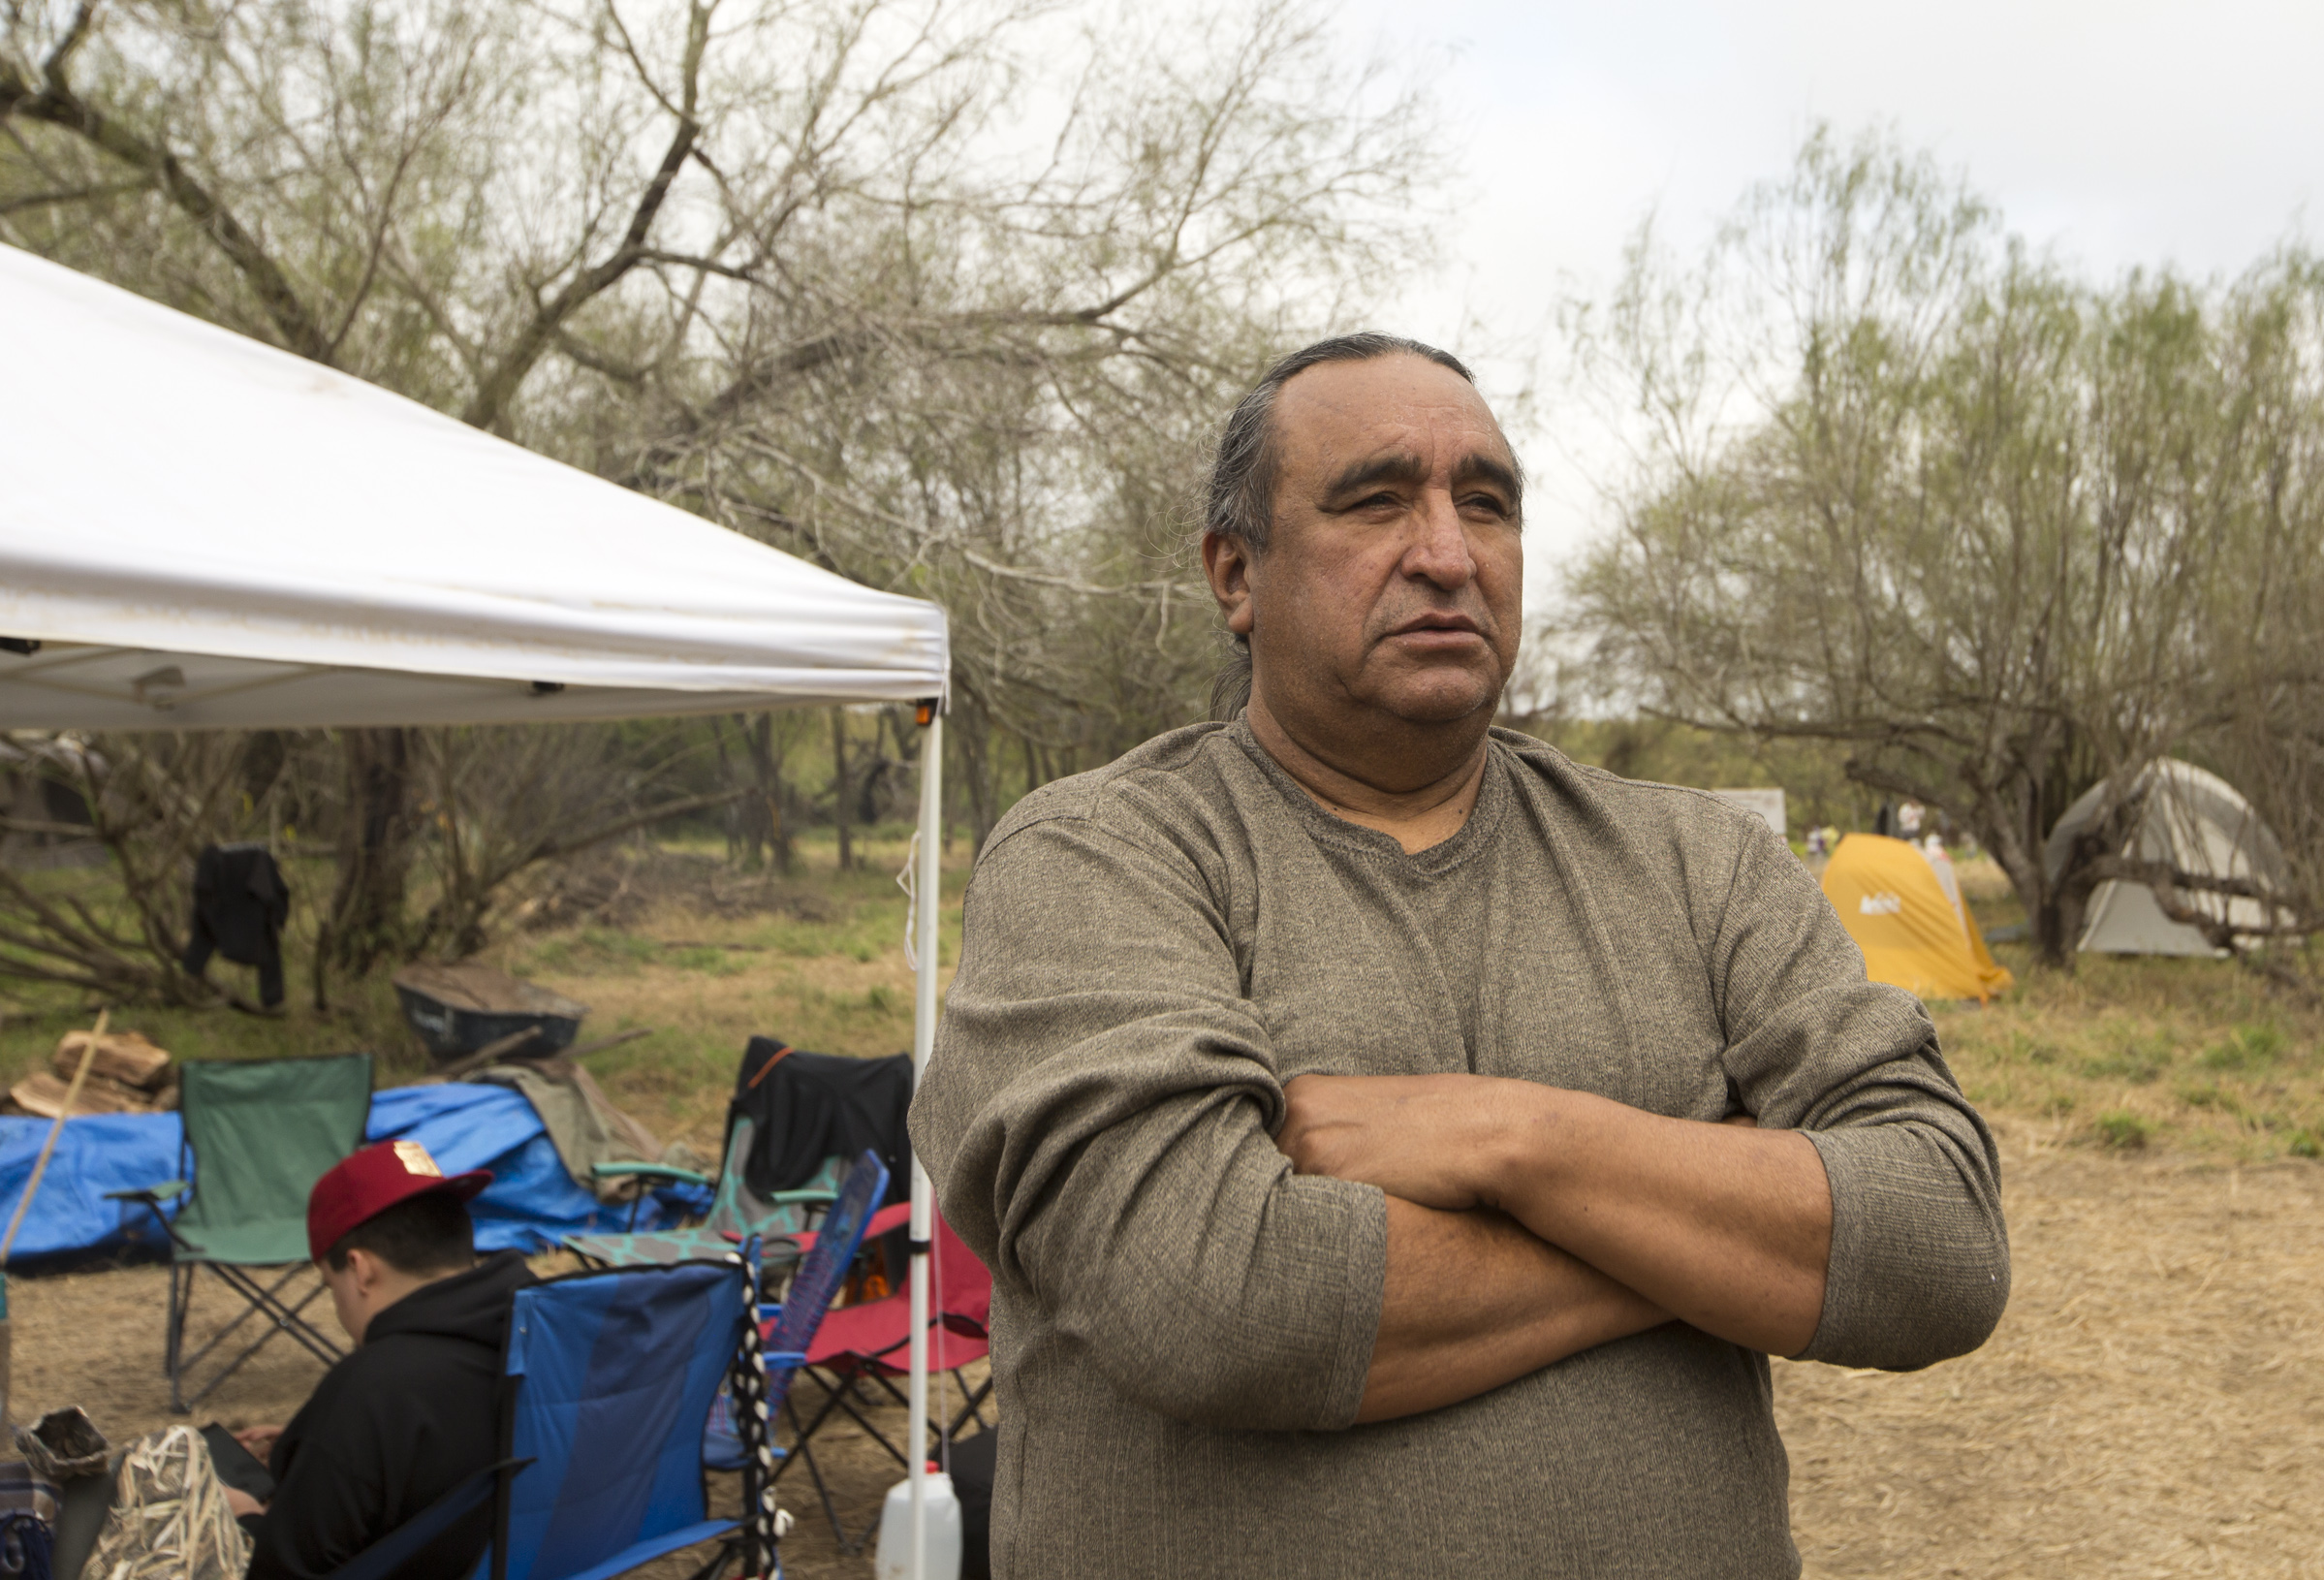 A Native American man in a gray long sleeve shirt stands with arms crossed and a distant, serious expression. Behind him are camp chairs with another tribesmember sitting in one.